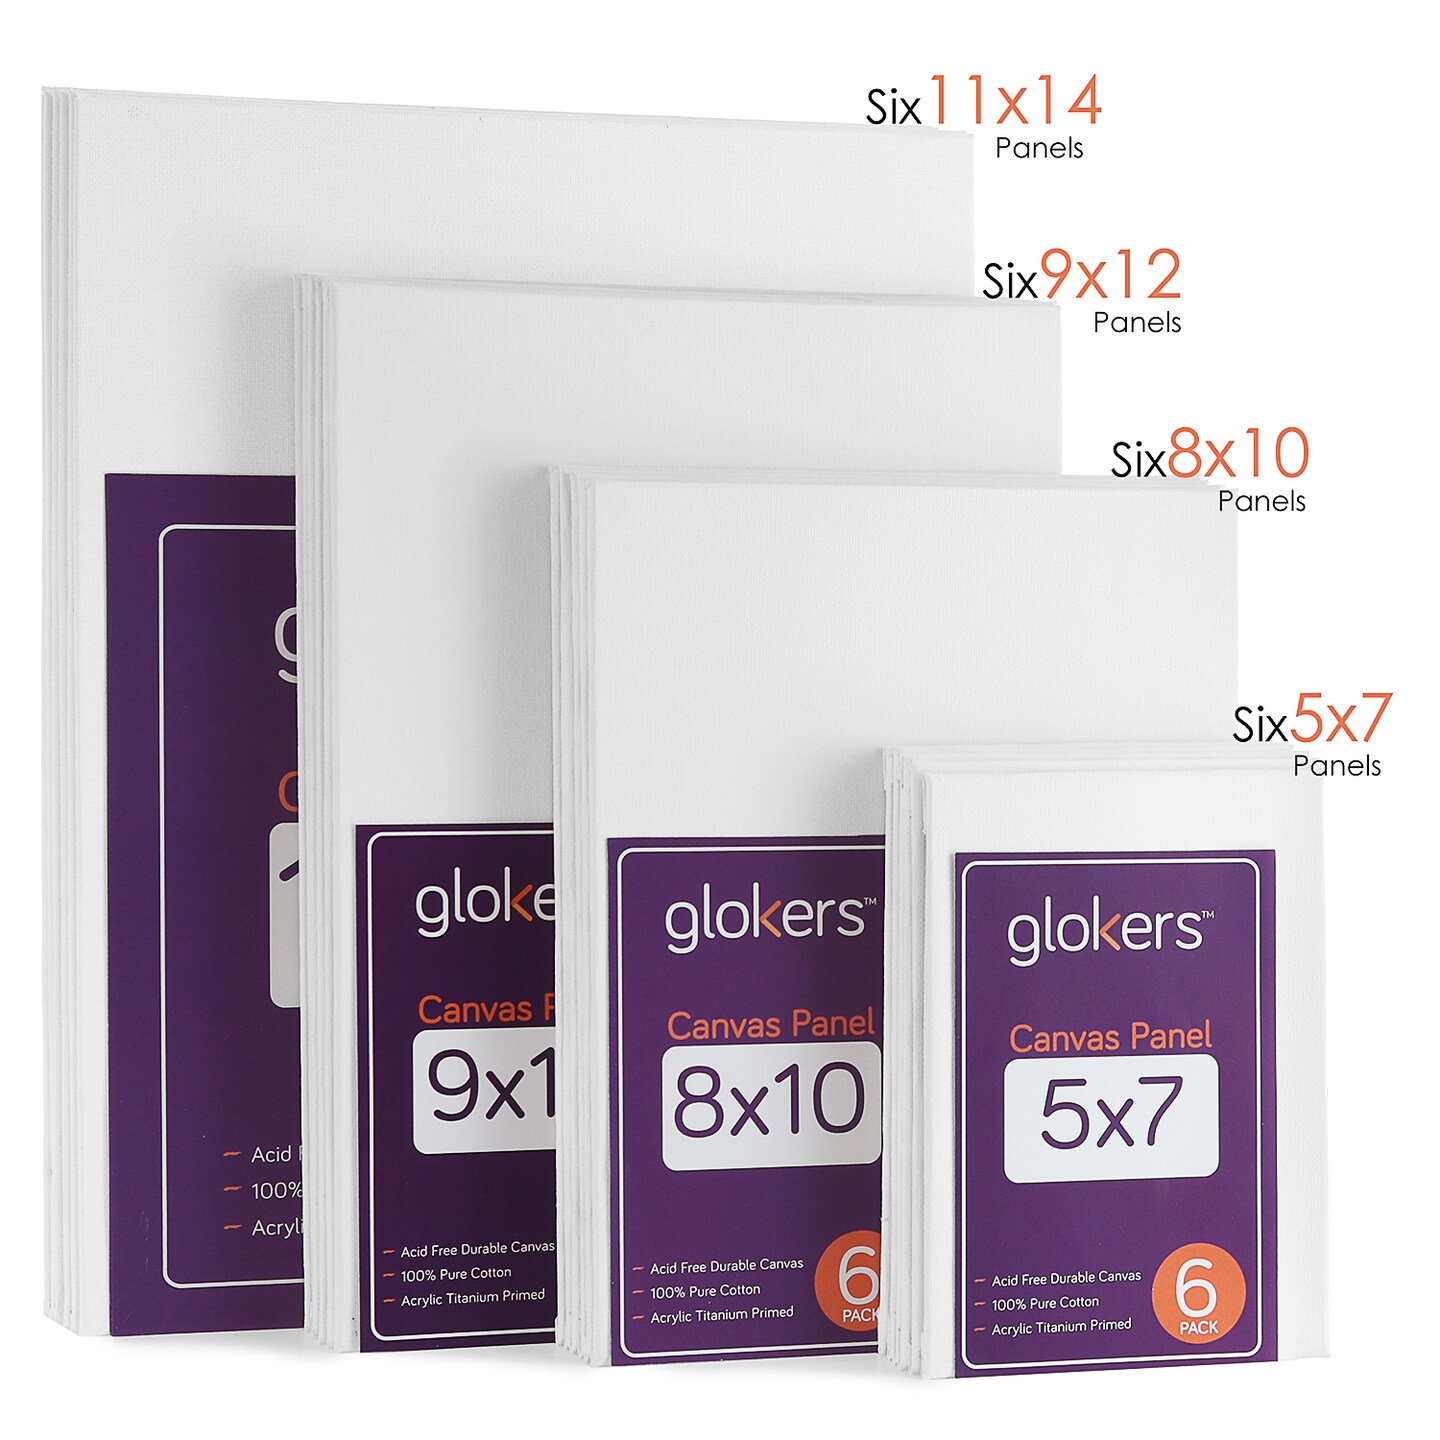 glokers Multi-Pack White Cotton Canvas Panels - 24 Blank Primed Painting  Canvases for Wet & Dry Art Media, Acrylic, Oil, Gouache & Tempera -  Professional Grade Artist Painting Canvases in 4 Sizes